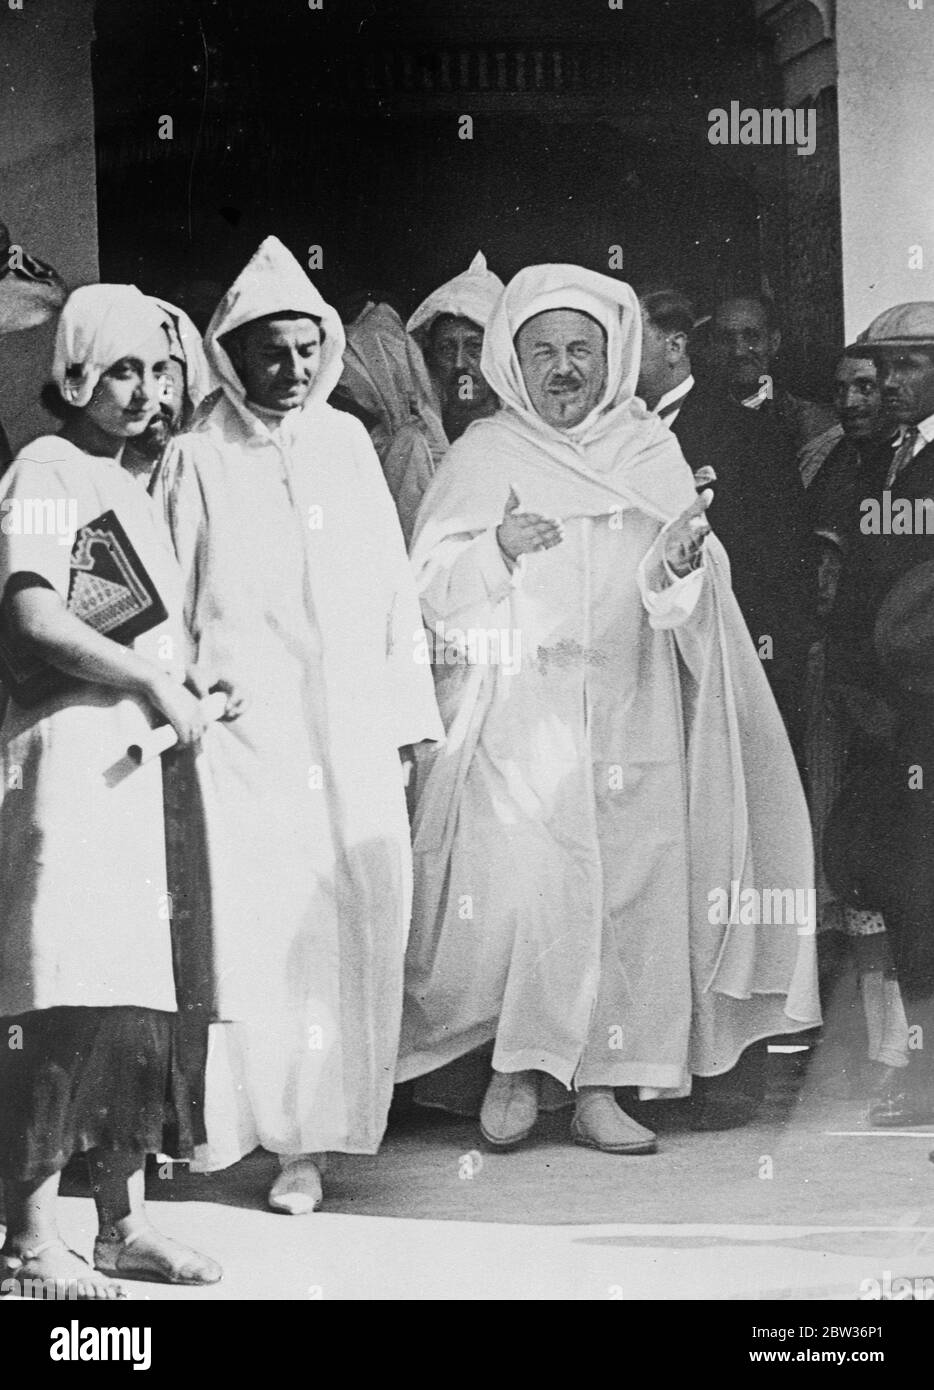 Sultan of Morocco visits Paris Mosque . The Sultan of Morocco , who is on his annual visit to the French capital , attended the Paris Mosque where he was received by Si Kaddour ben Ghabrit , head of the Moslem community in Paris . Photo shows ; The Sultan of Morocco ( left ) leaving the Paris Mosque with Si Kaddour ben Ghabrit . 22 August 1933 Stock Photo